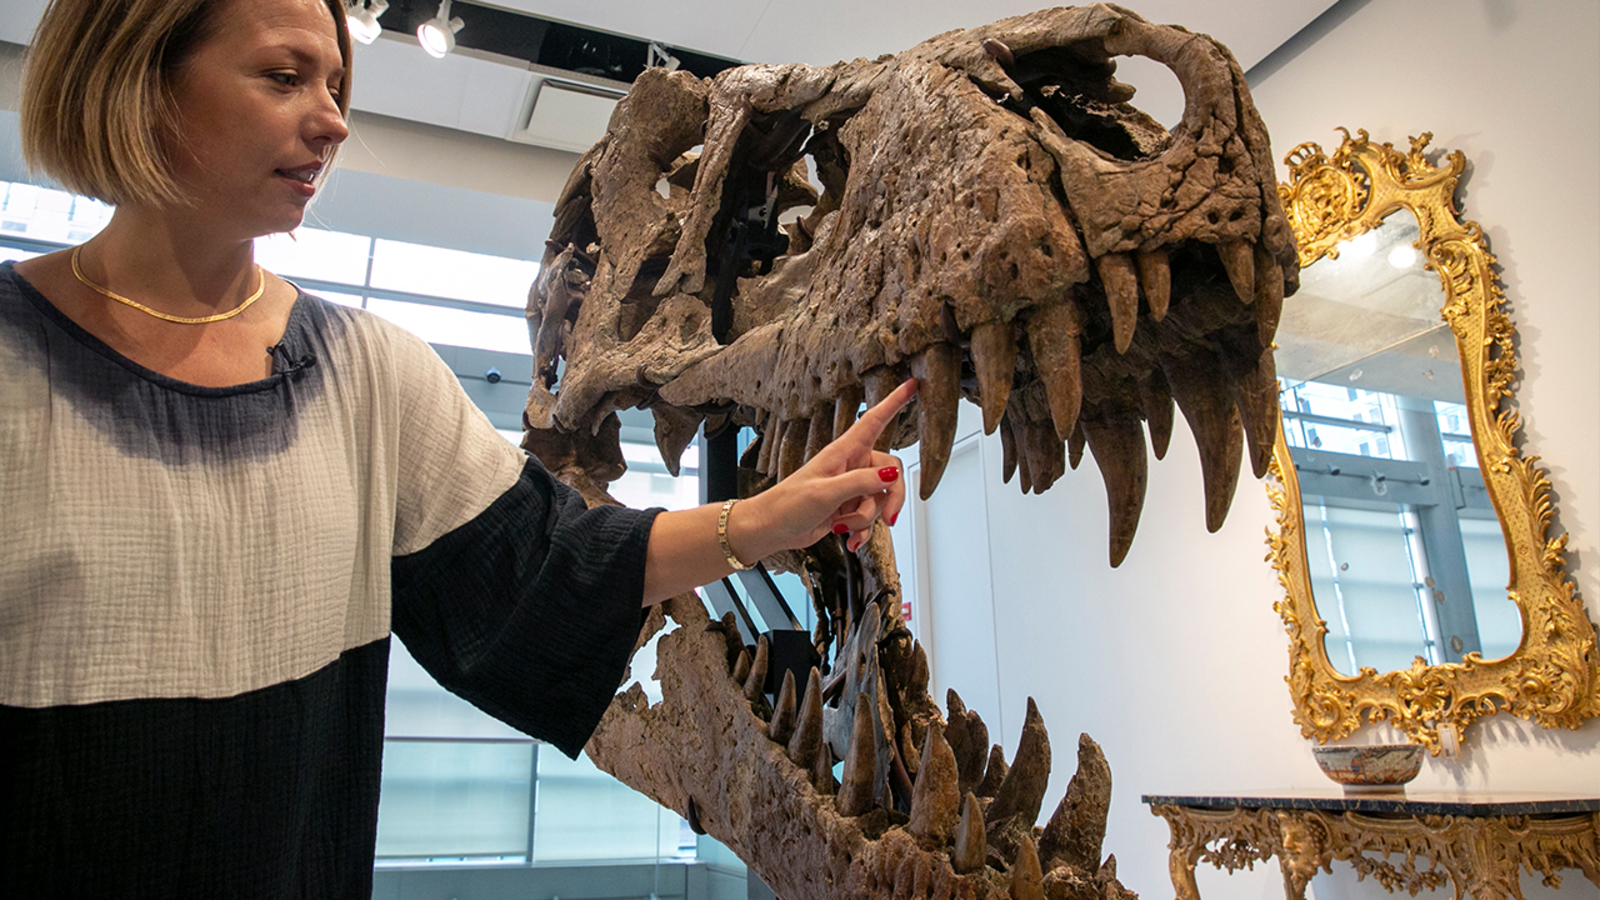 T rex skull nicknamed Maximus to be auctioned in New York City